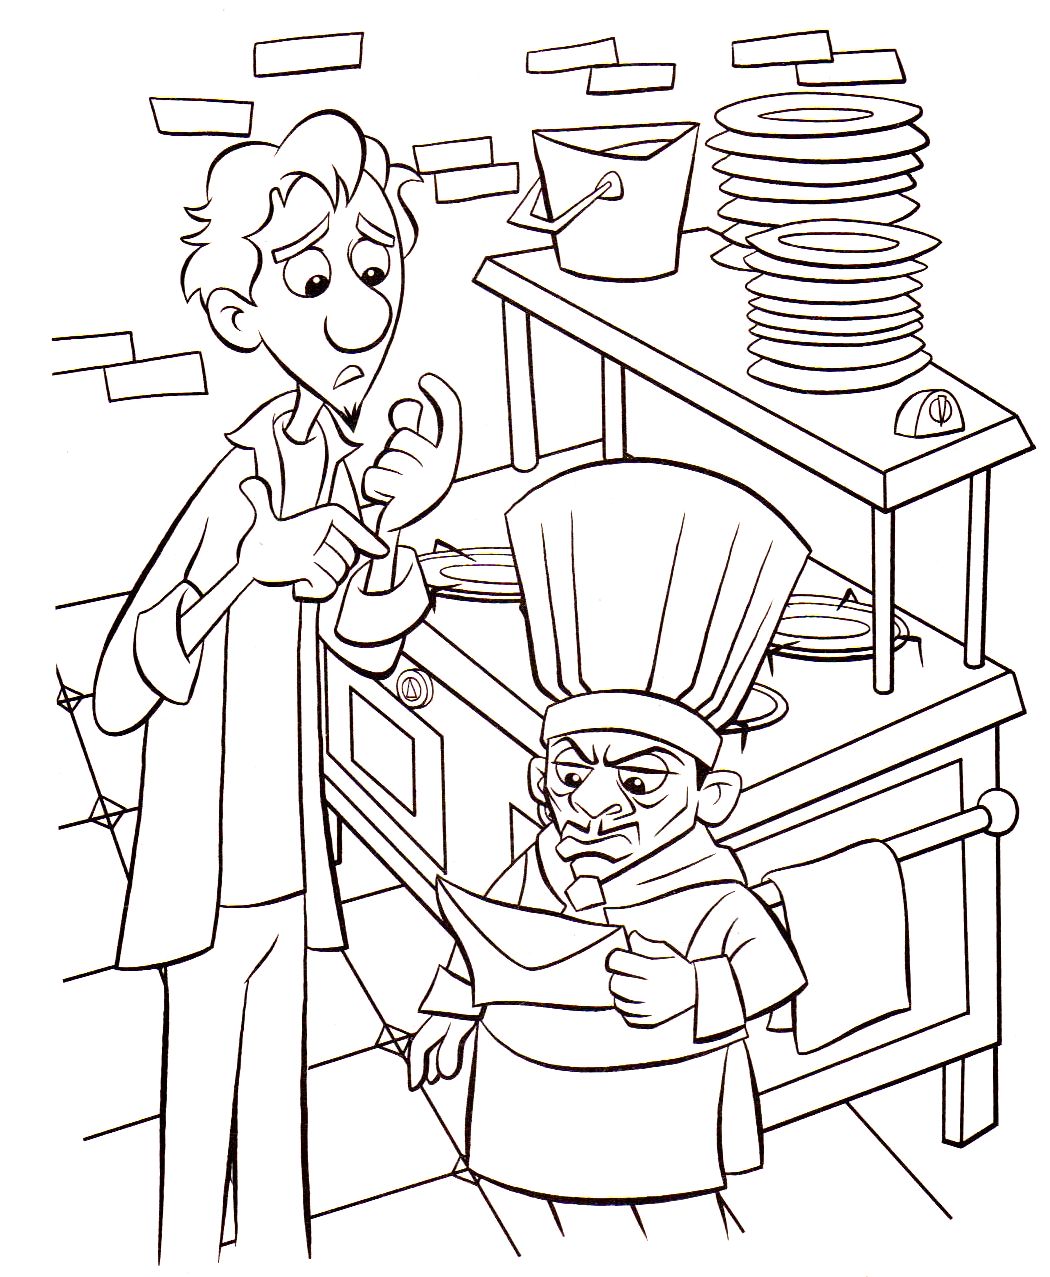 Ratatouille coloring pages for kids - Ratatouille Kids Coloring Pages